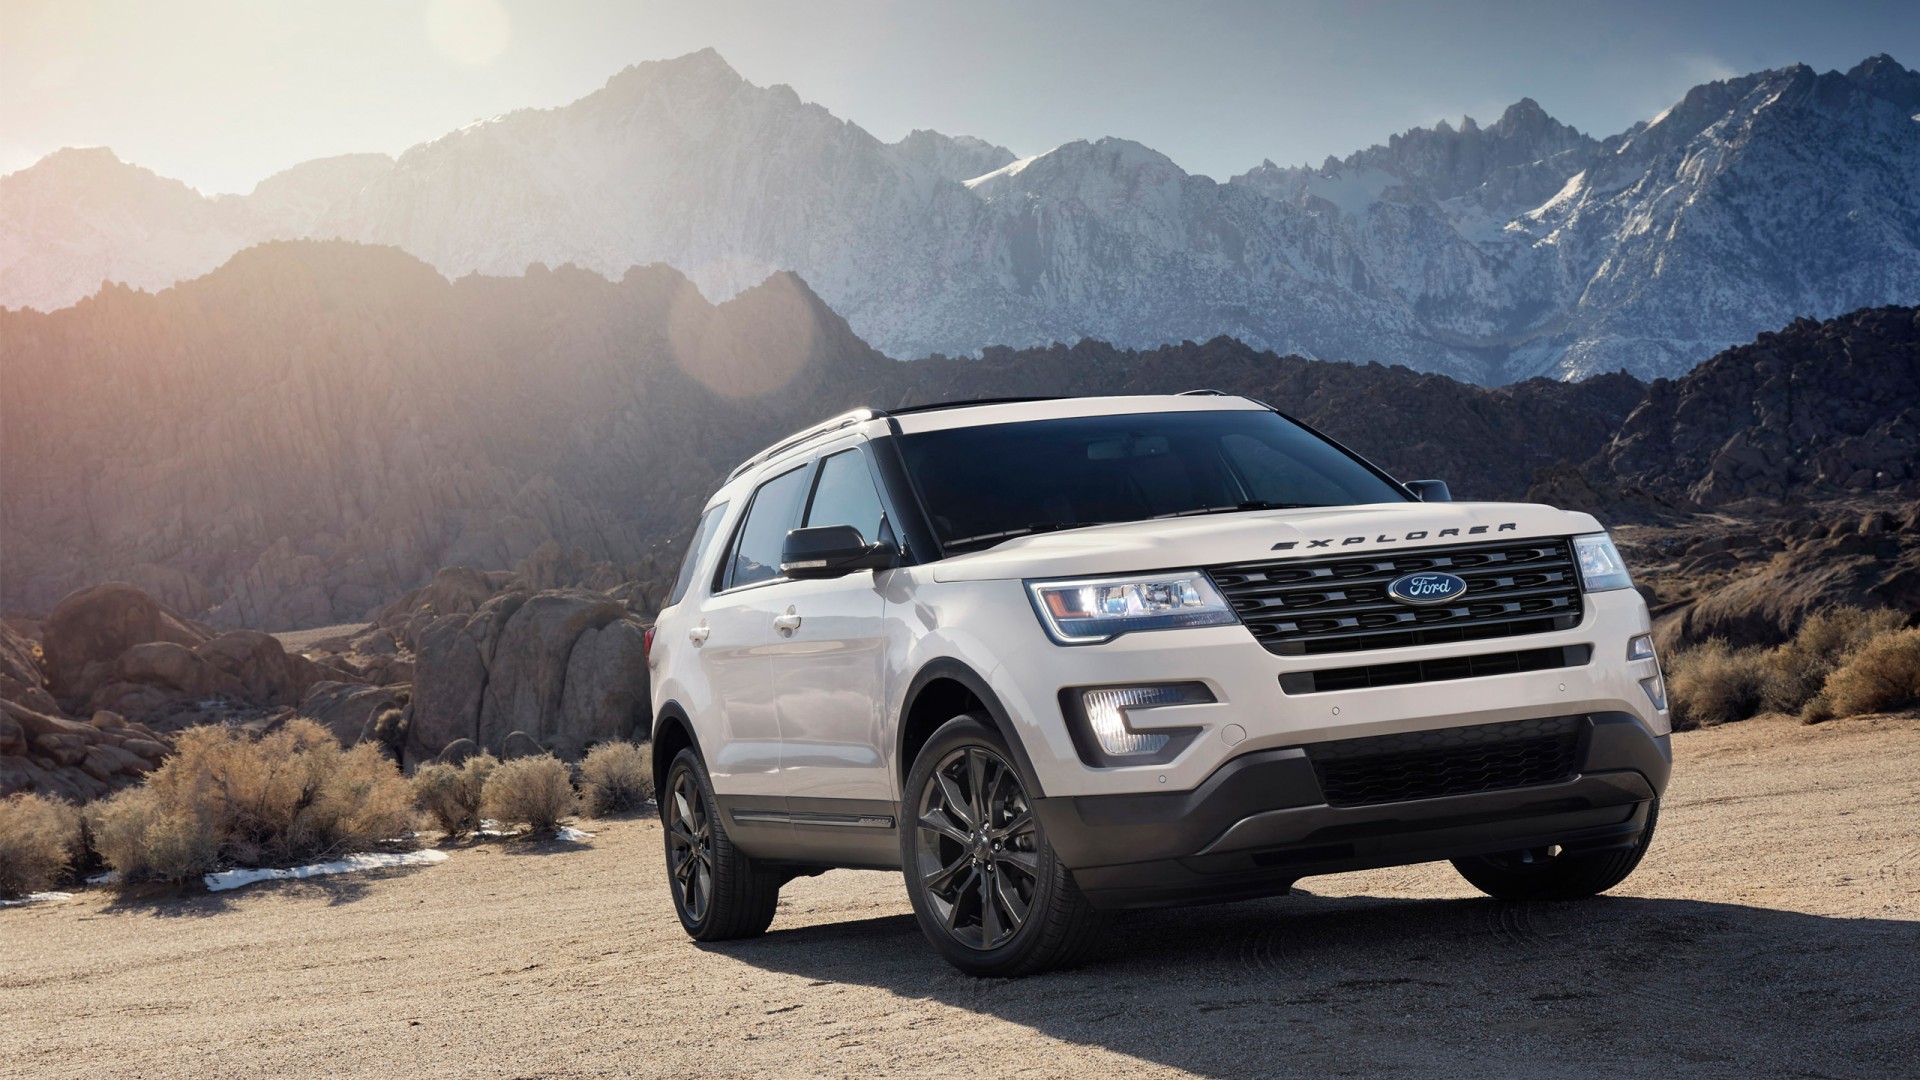 2017 Ford Explorer Xlt Appearance Package Wallpaper Hd Car Wallpapers Id 6144